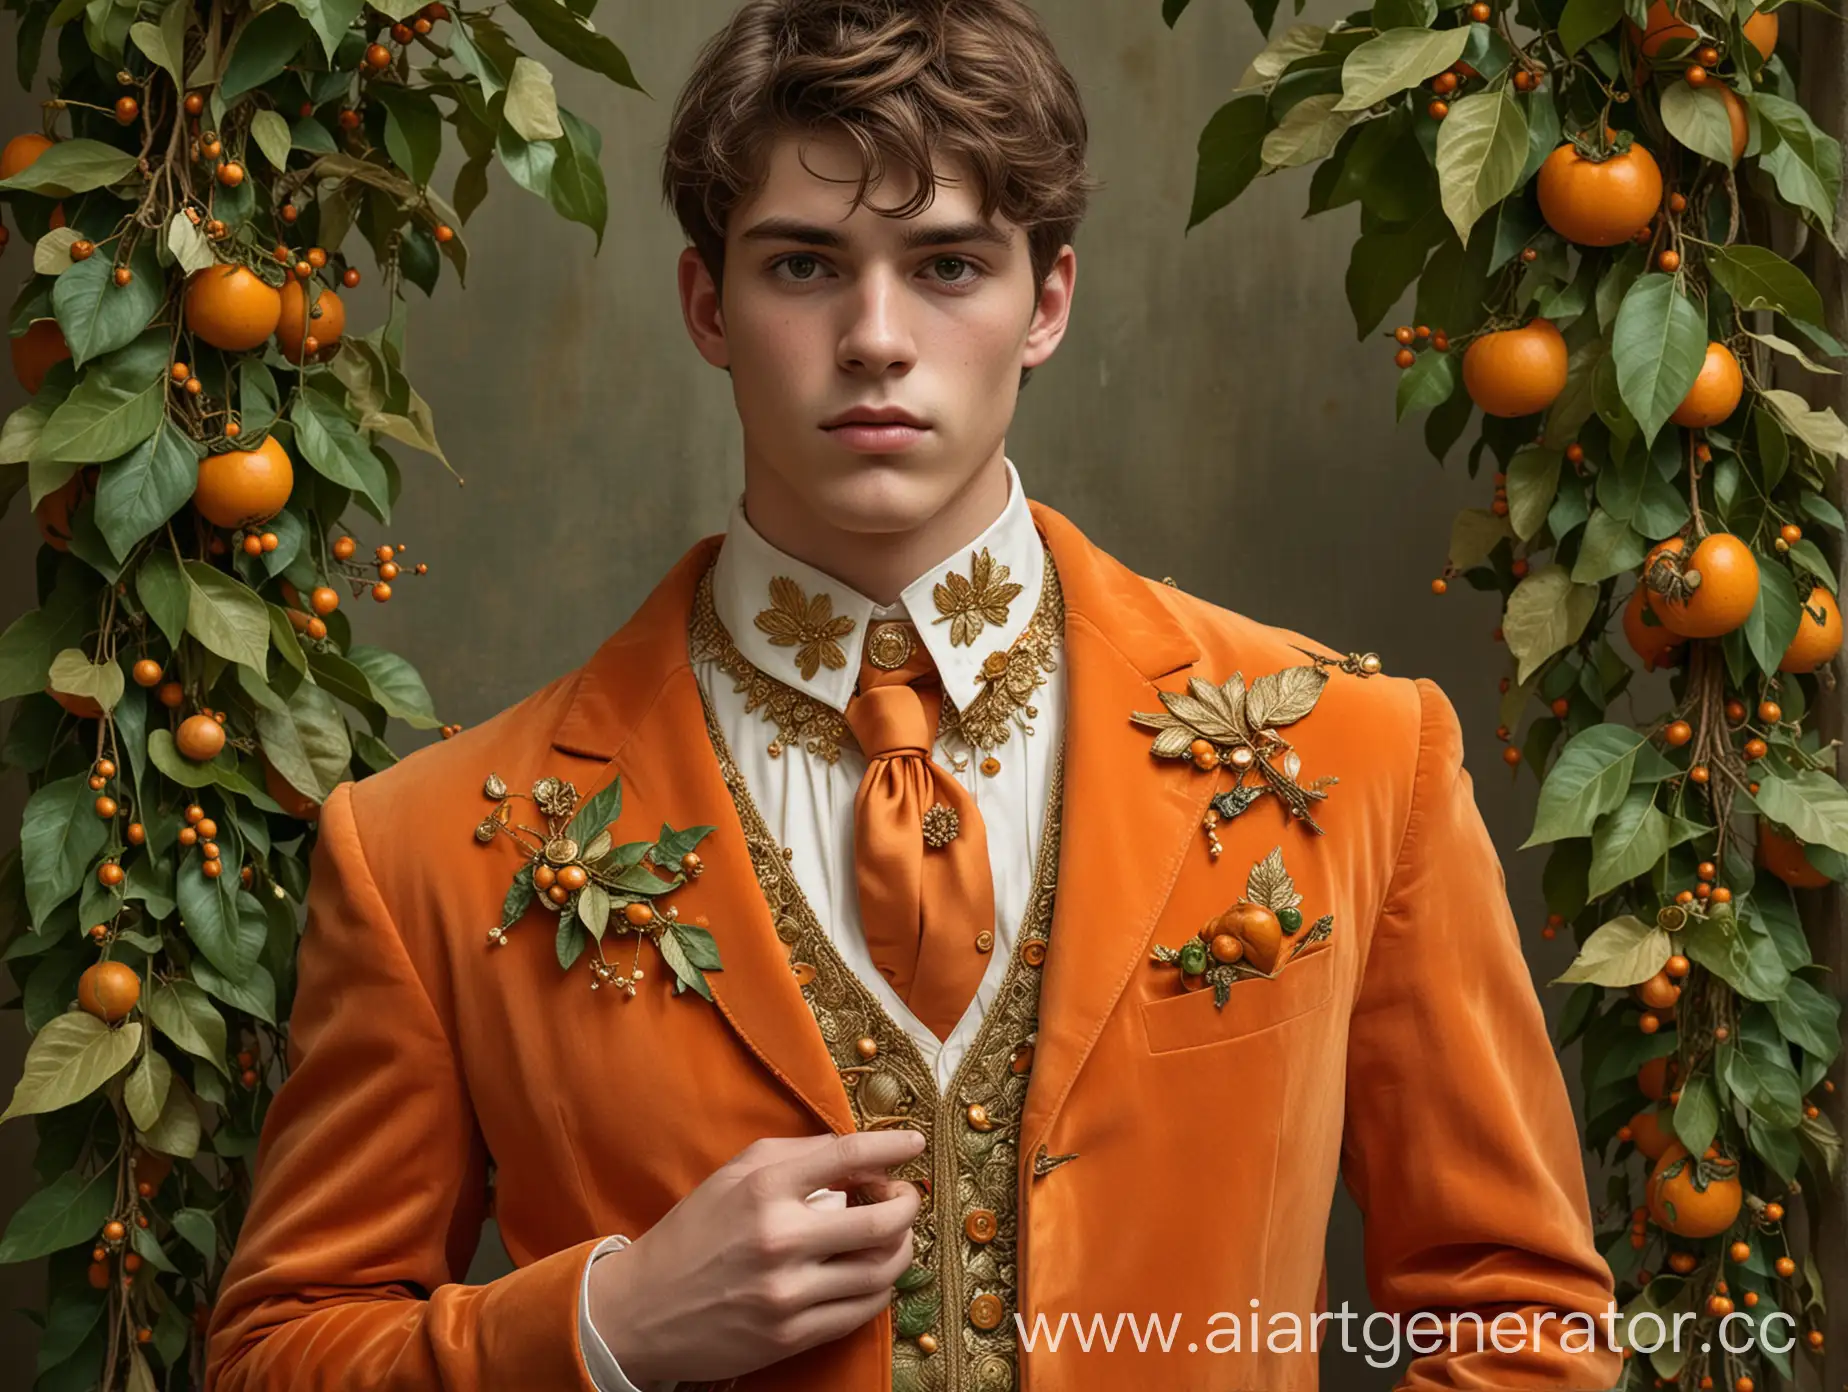 Stylish-Young-Man-in-Persimmon-Suit-with-Peach-Brooch-and-Emerald-Accents-Holding-Sickles